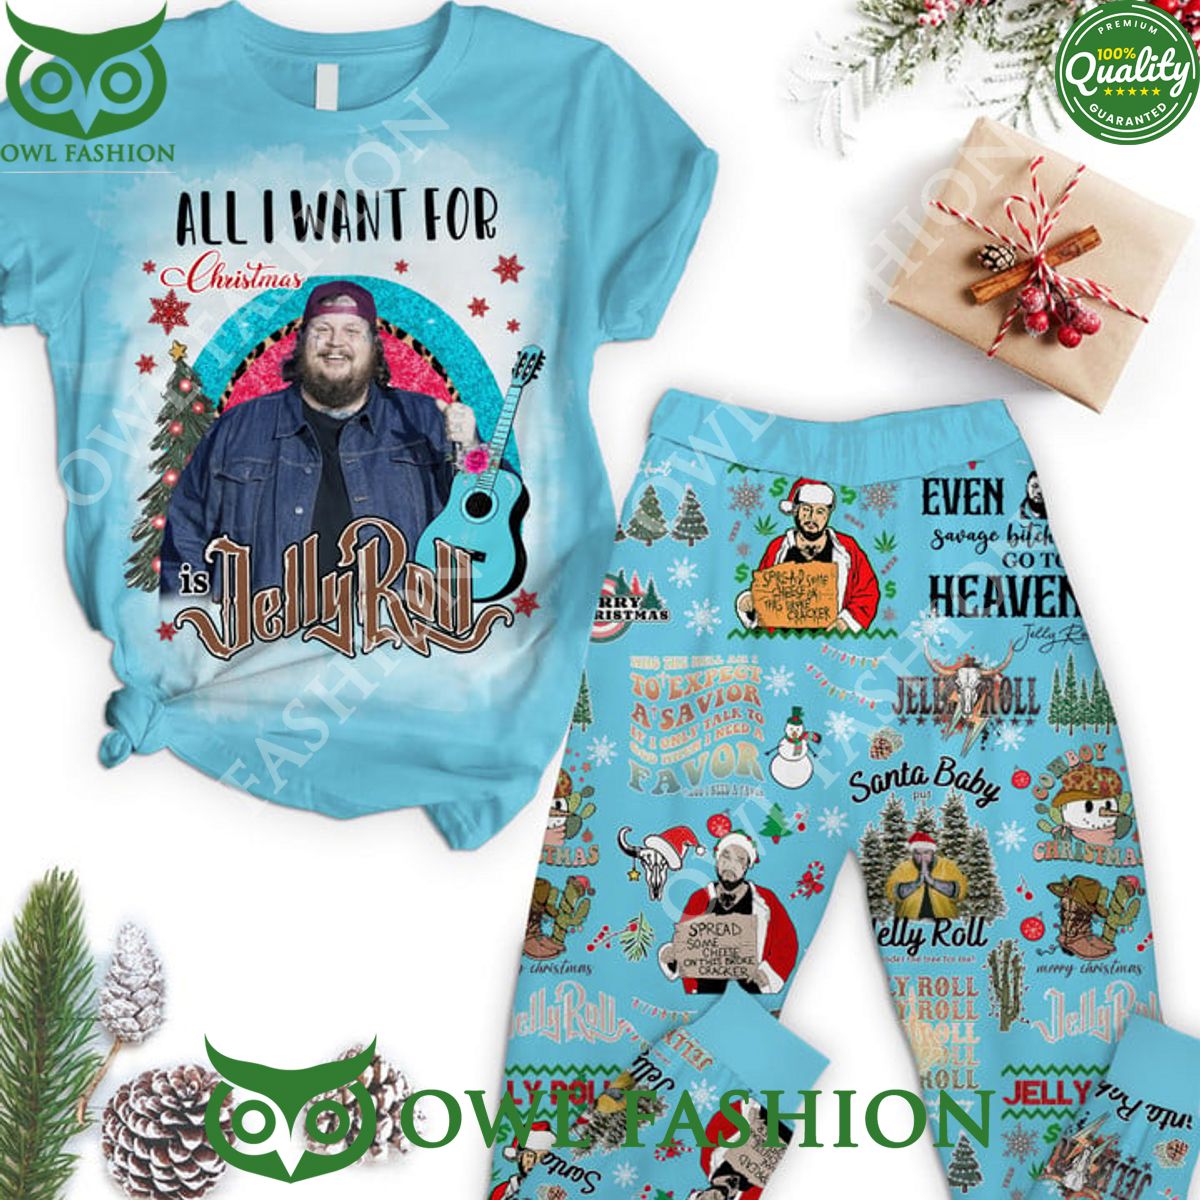 jelly roll rapper christmas pajamas set all i want for 1 ZRd0l.jpg